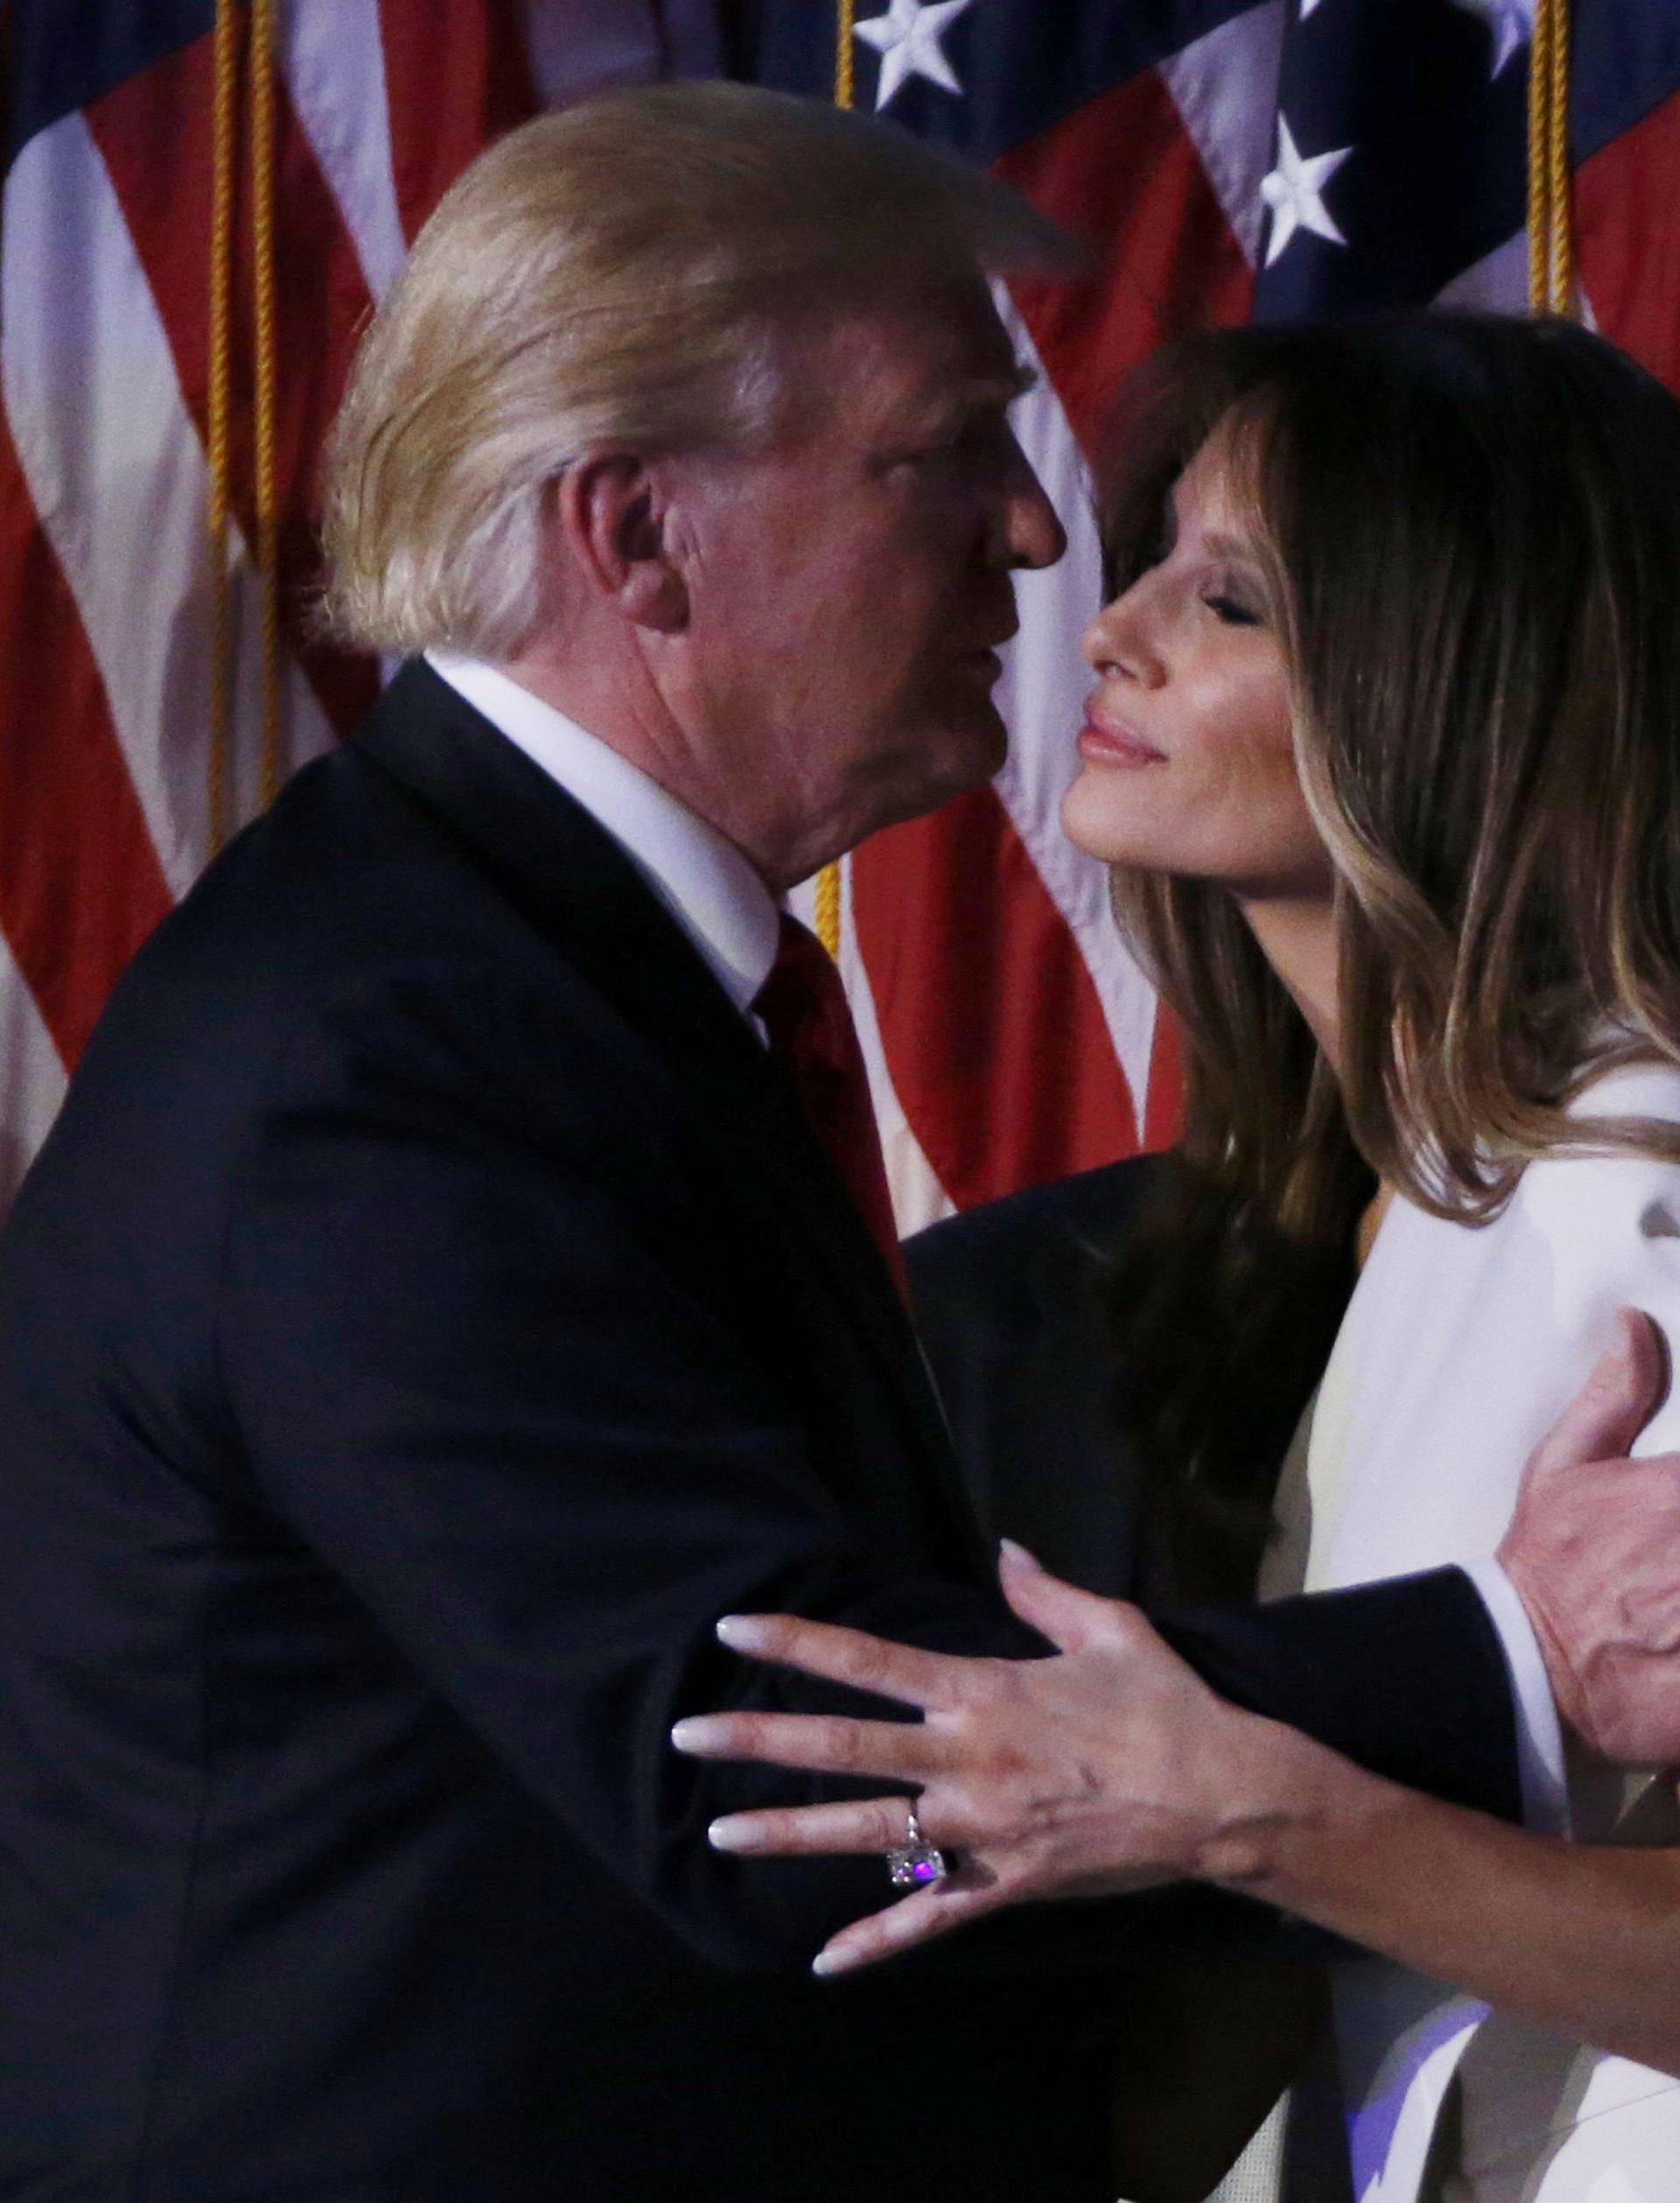 Republican U.S. President-elect Donald Trump kisses his wife Melania at his rally in New York